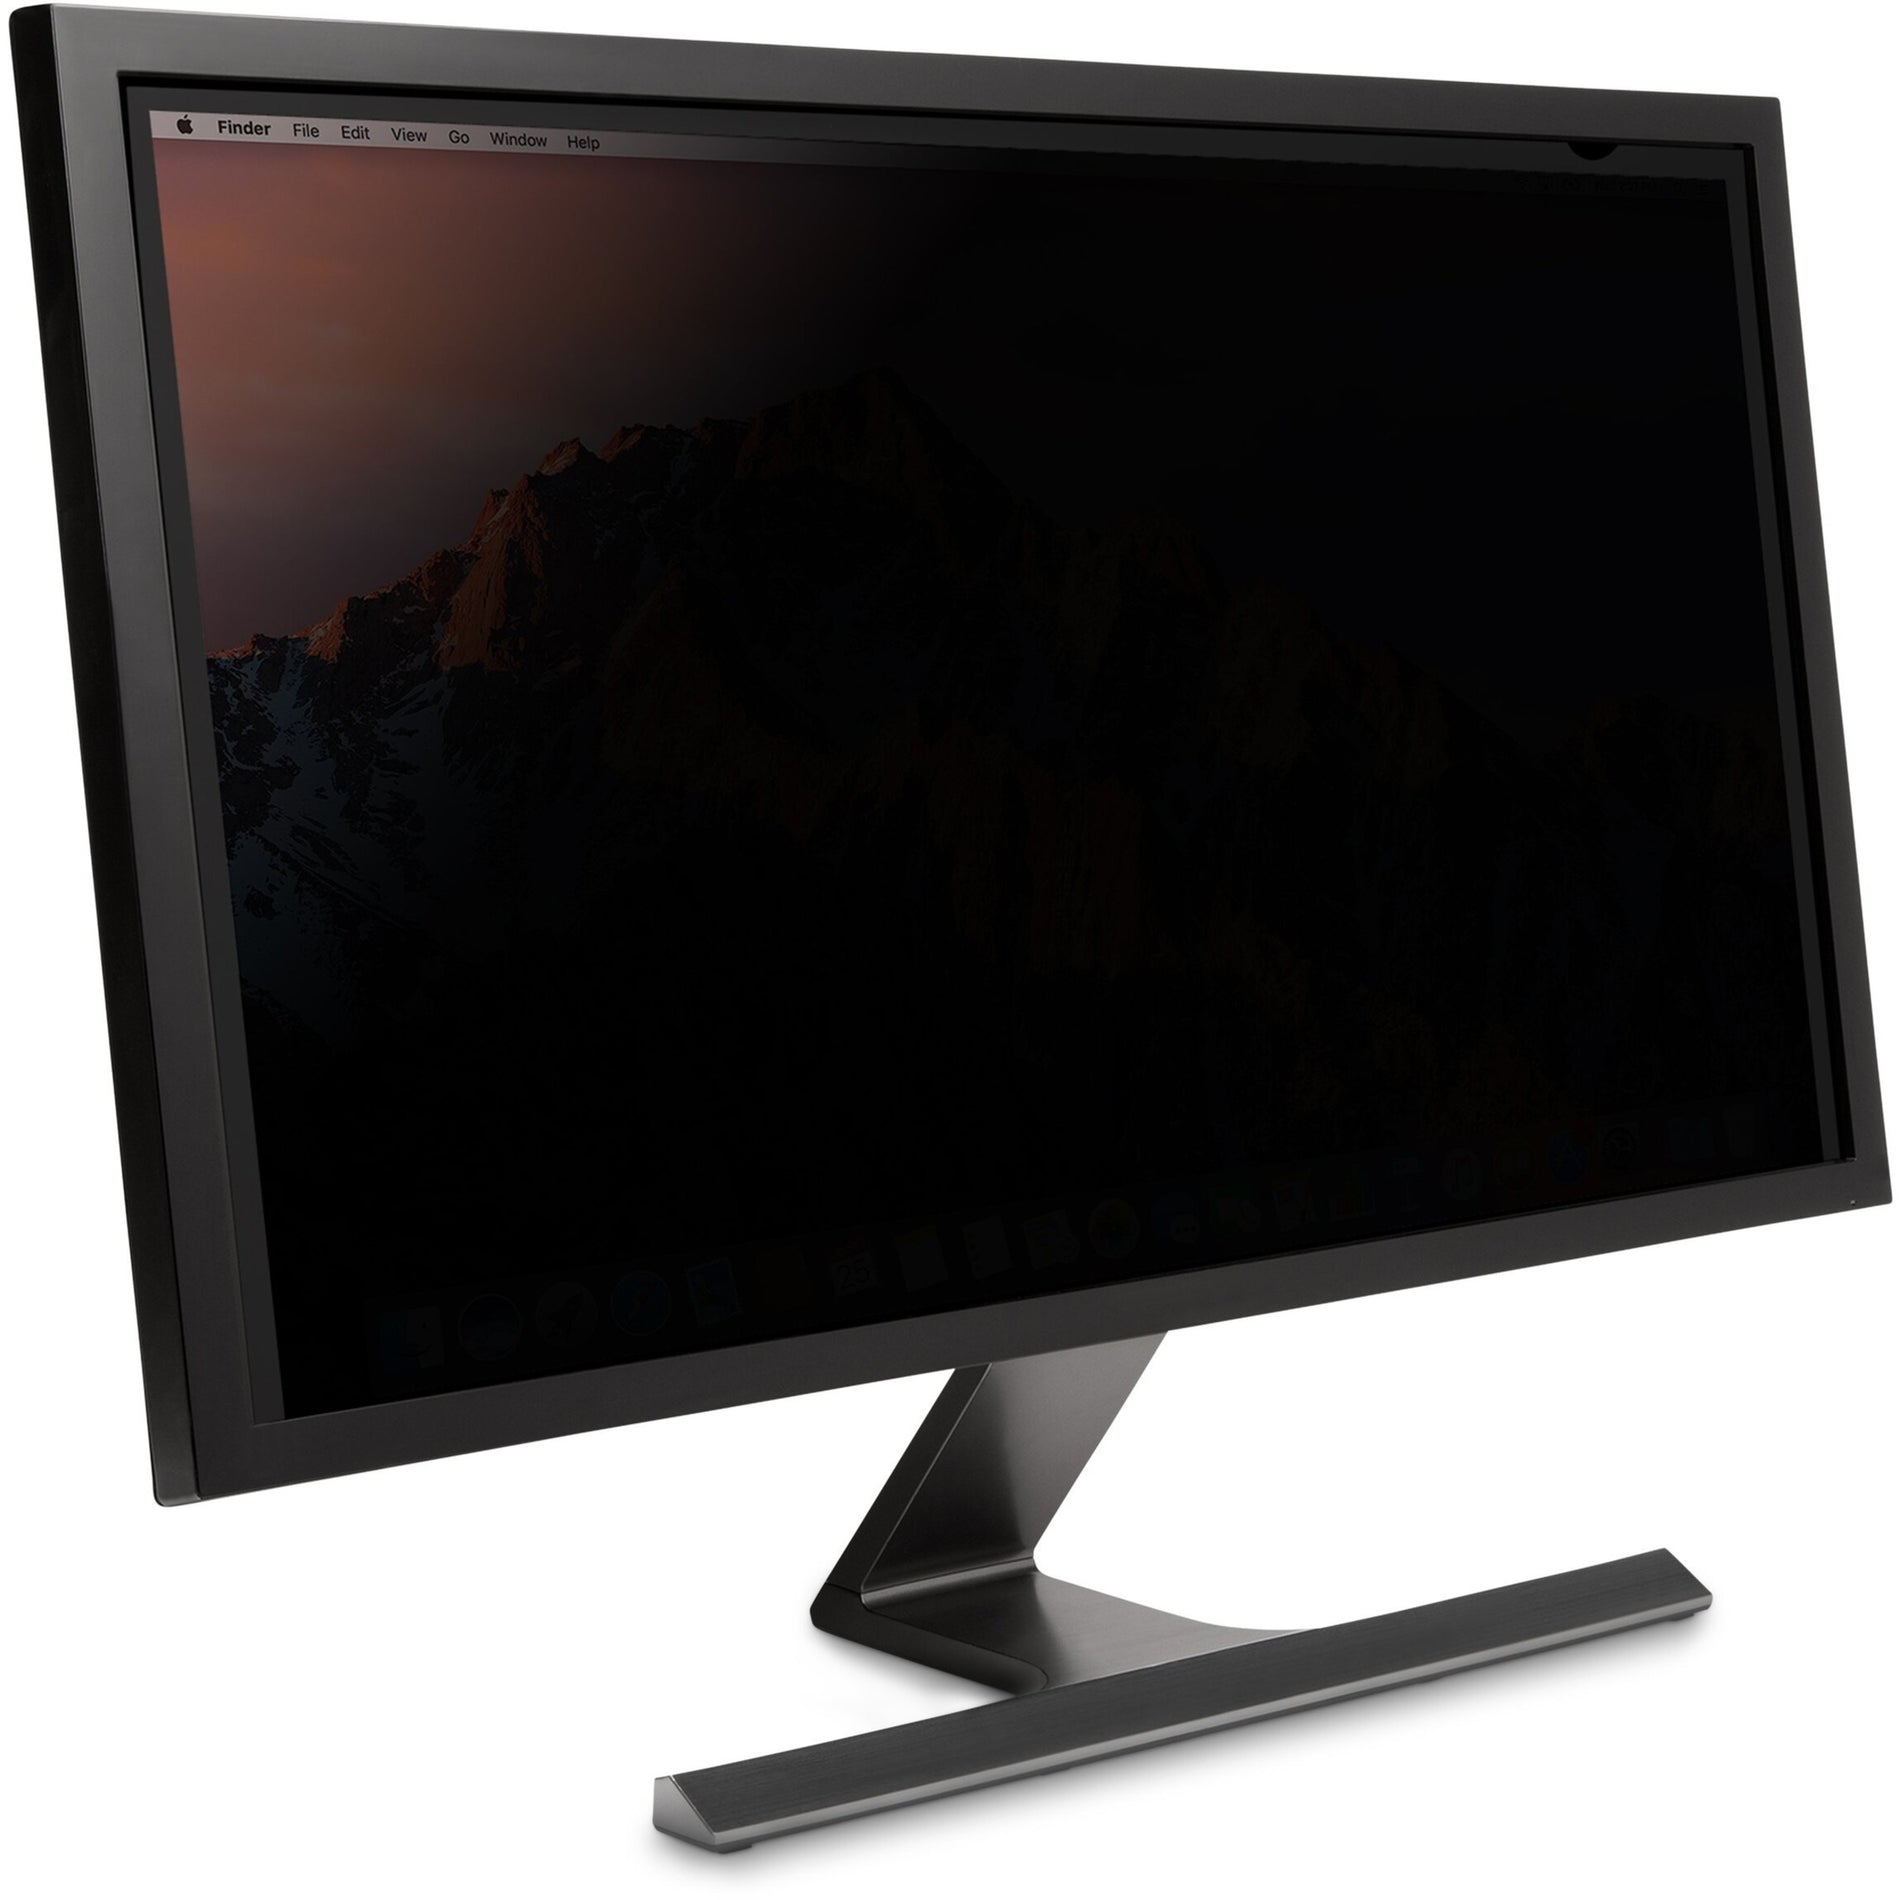 Kensington K55797WW FP215W9 Privacy Screen for 21.5" Widescreen Monitors, Blue Light Reduction, Easy to Apply/Remove